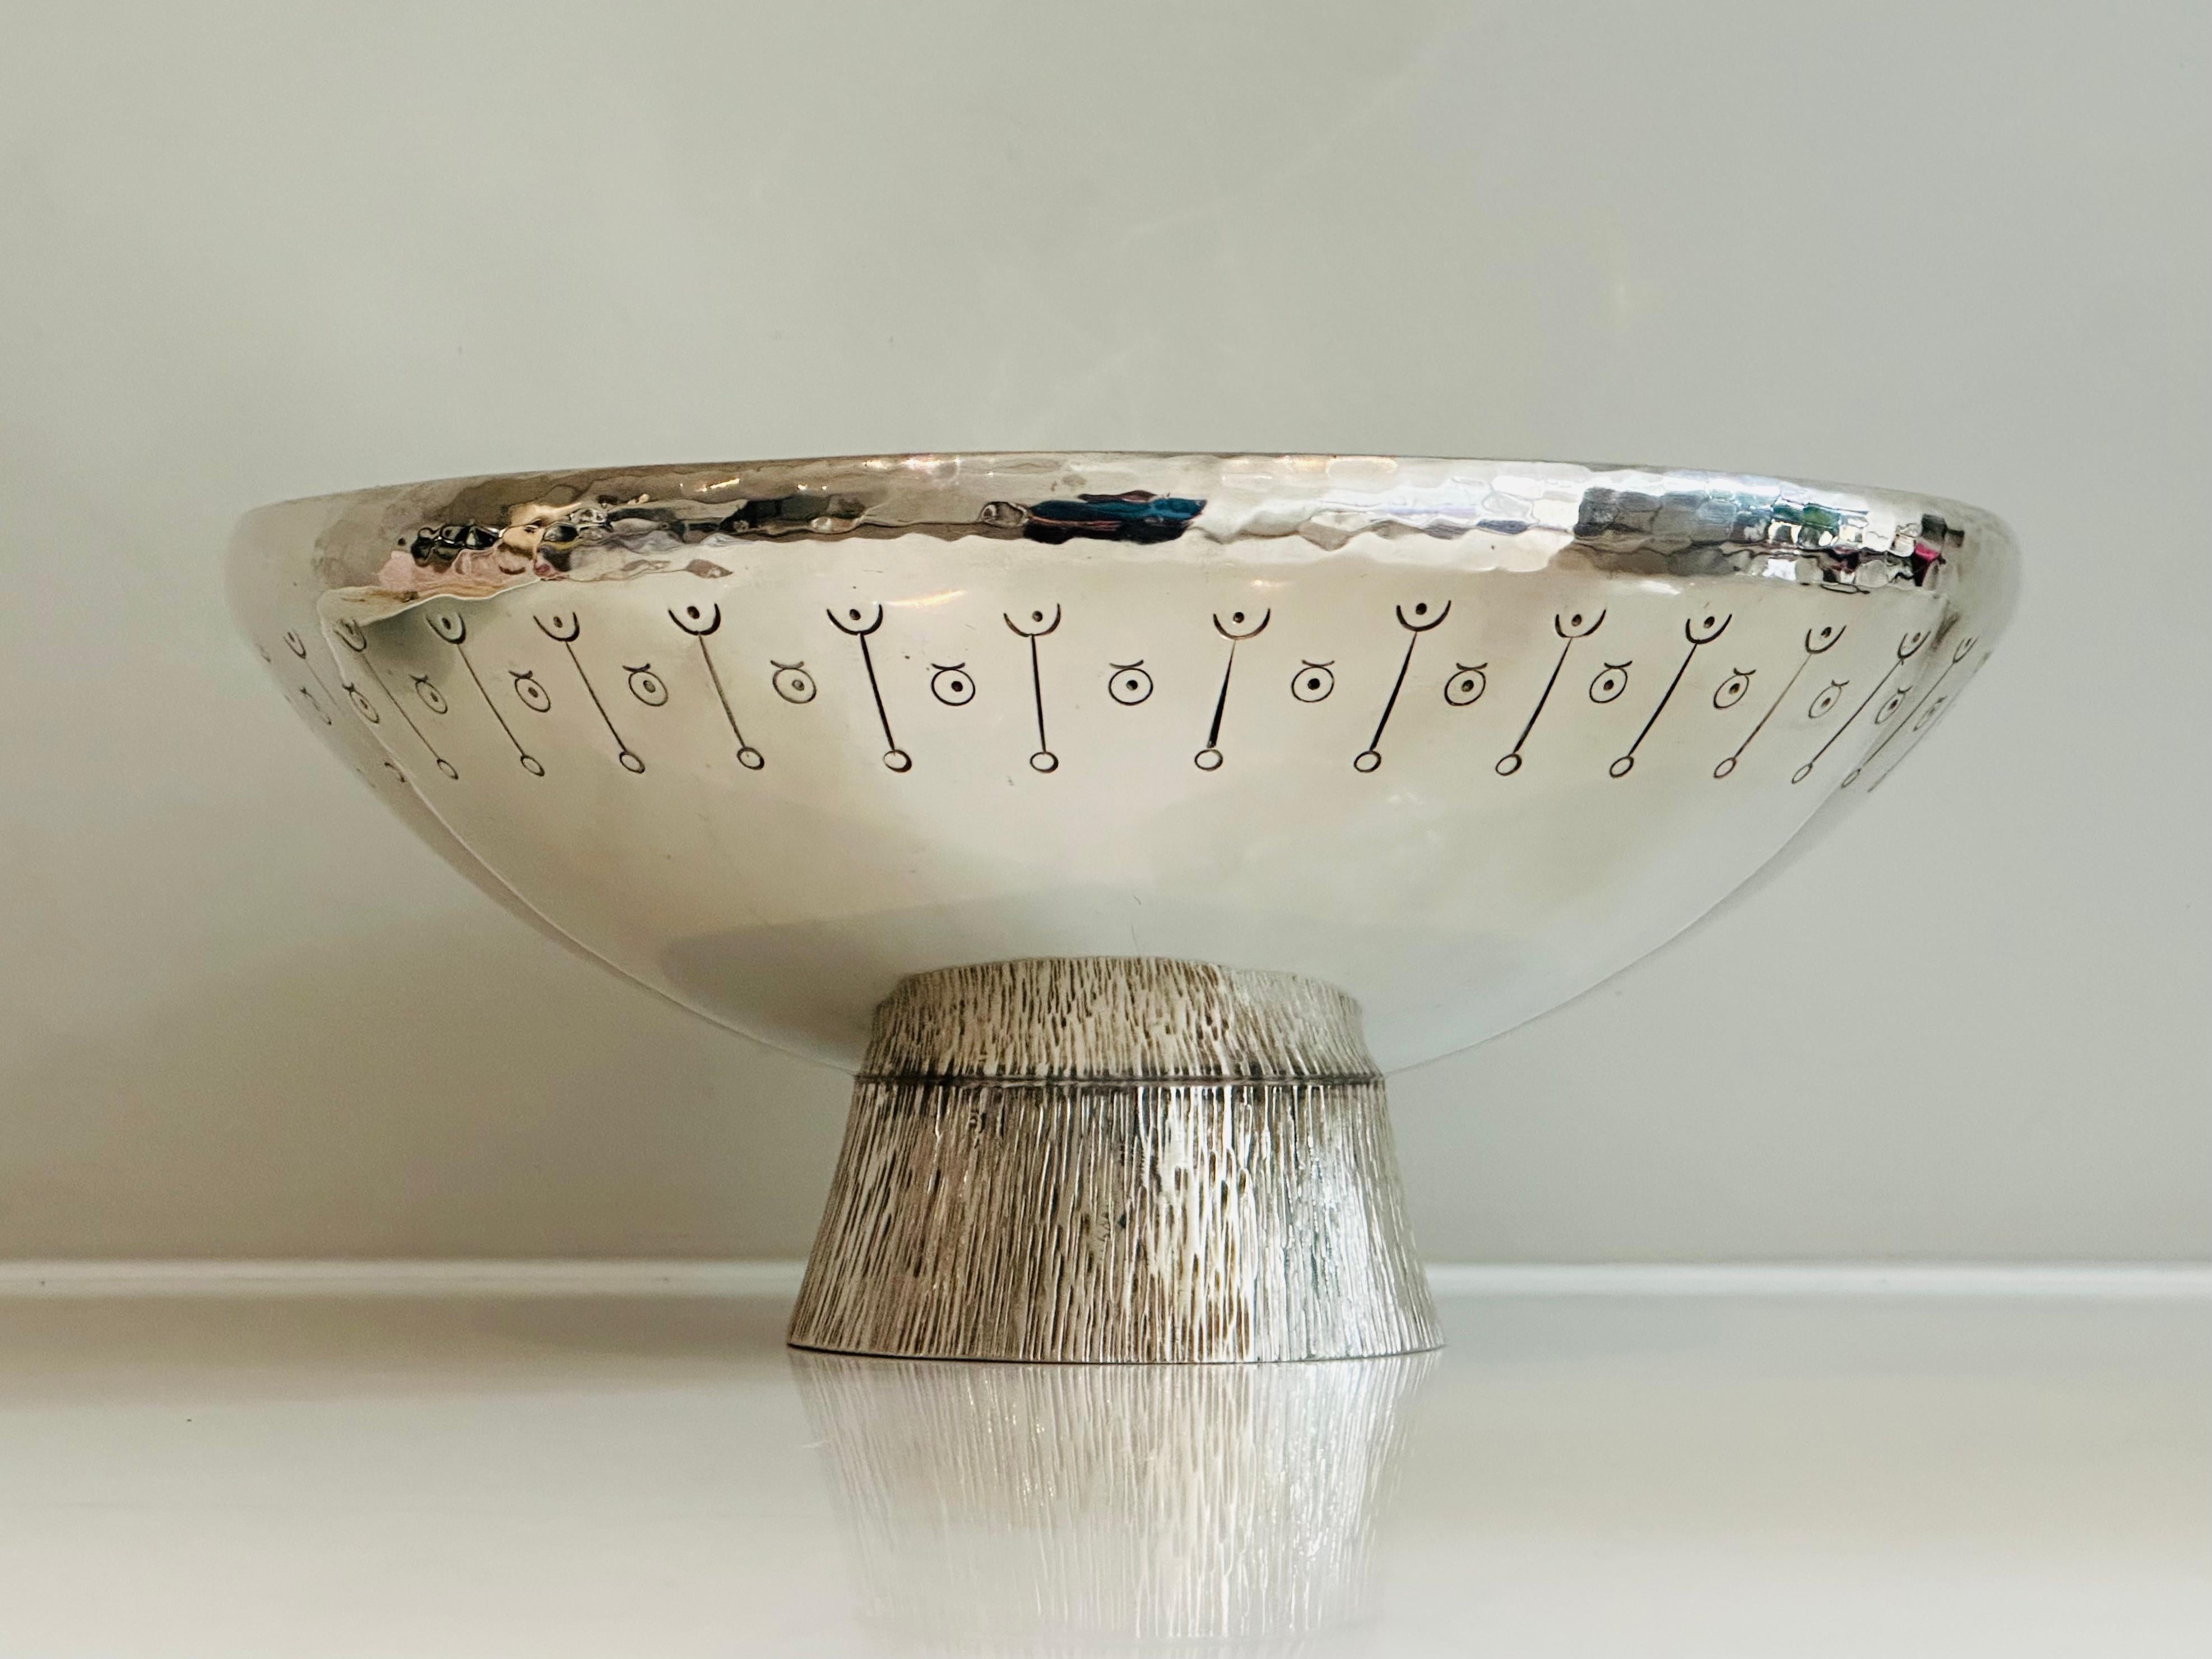 1980s English Silver Plated Decorative Hand-Hammered Serving or Display Bowl 3